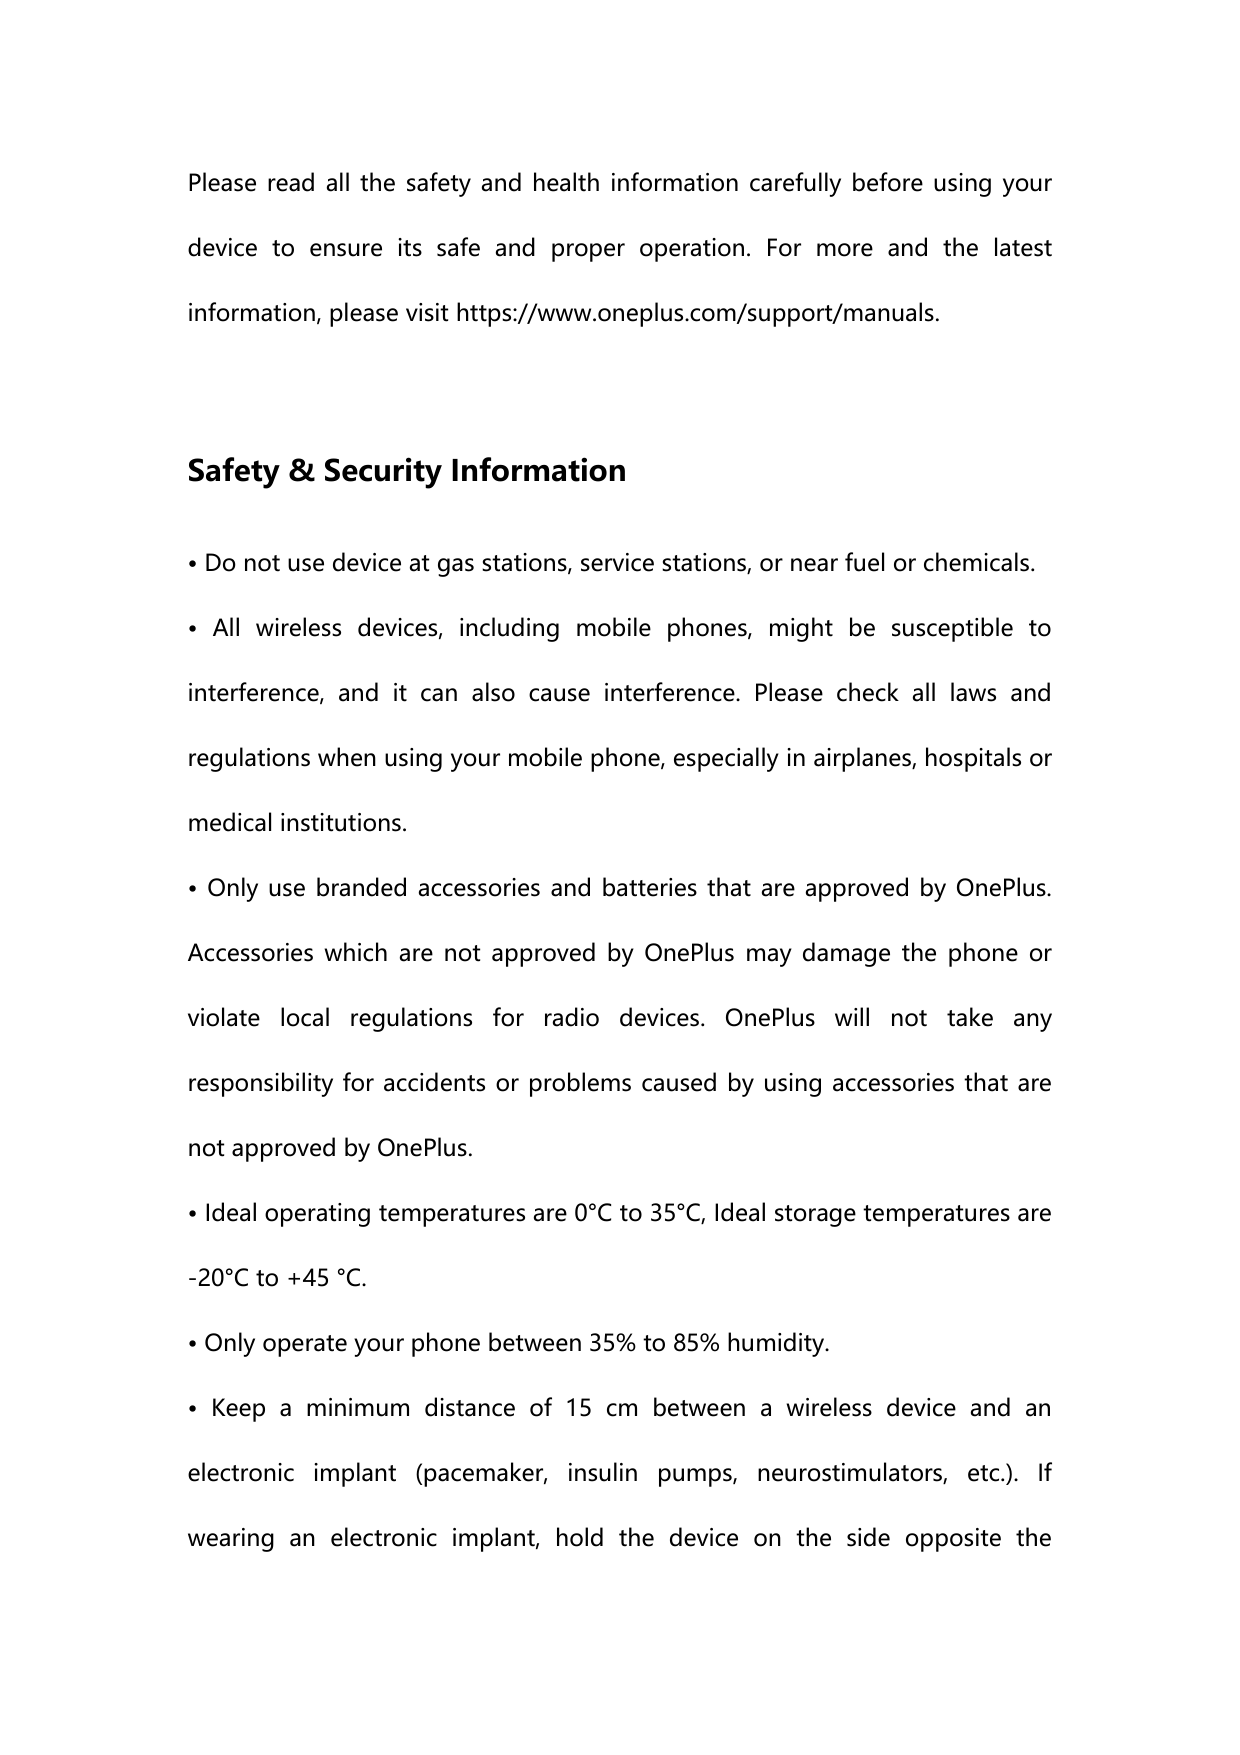 Please read all the safety and health information carefully before using yourdevice to ensure its safe and proper operation. For